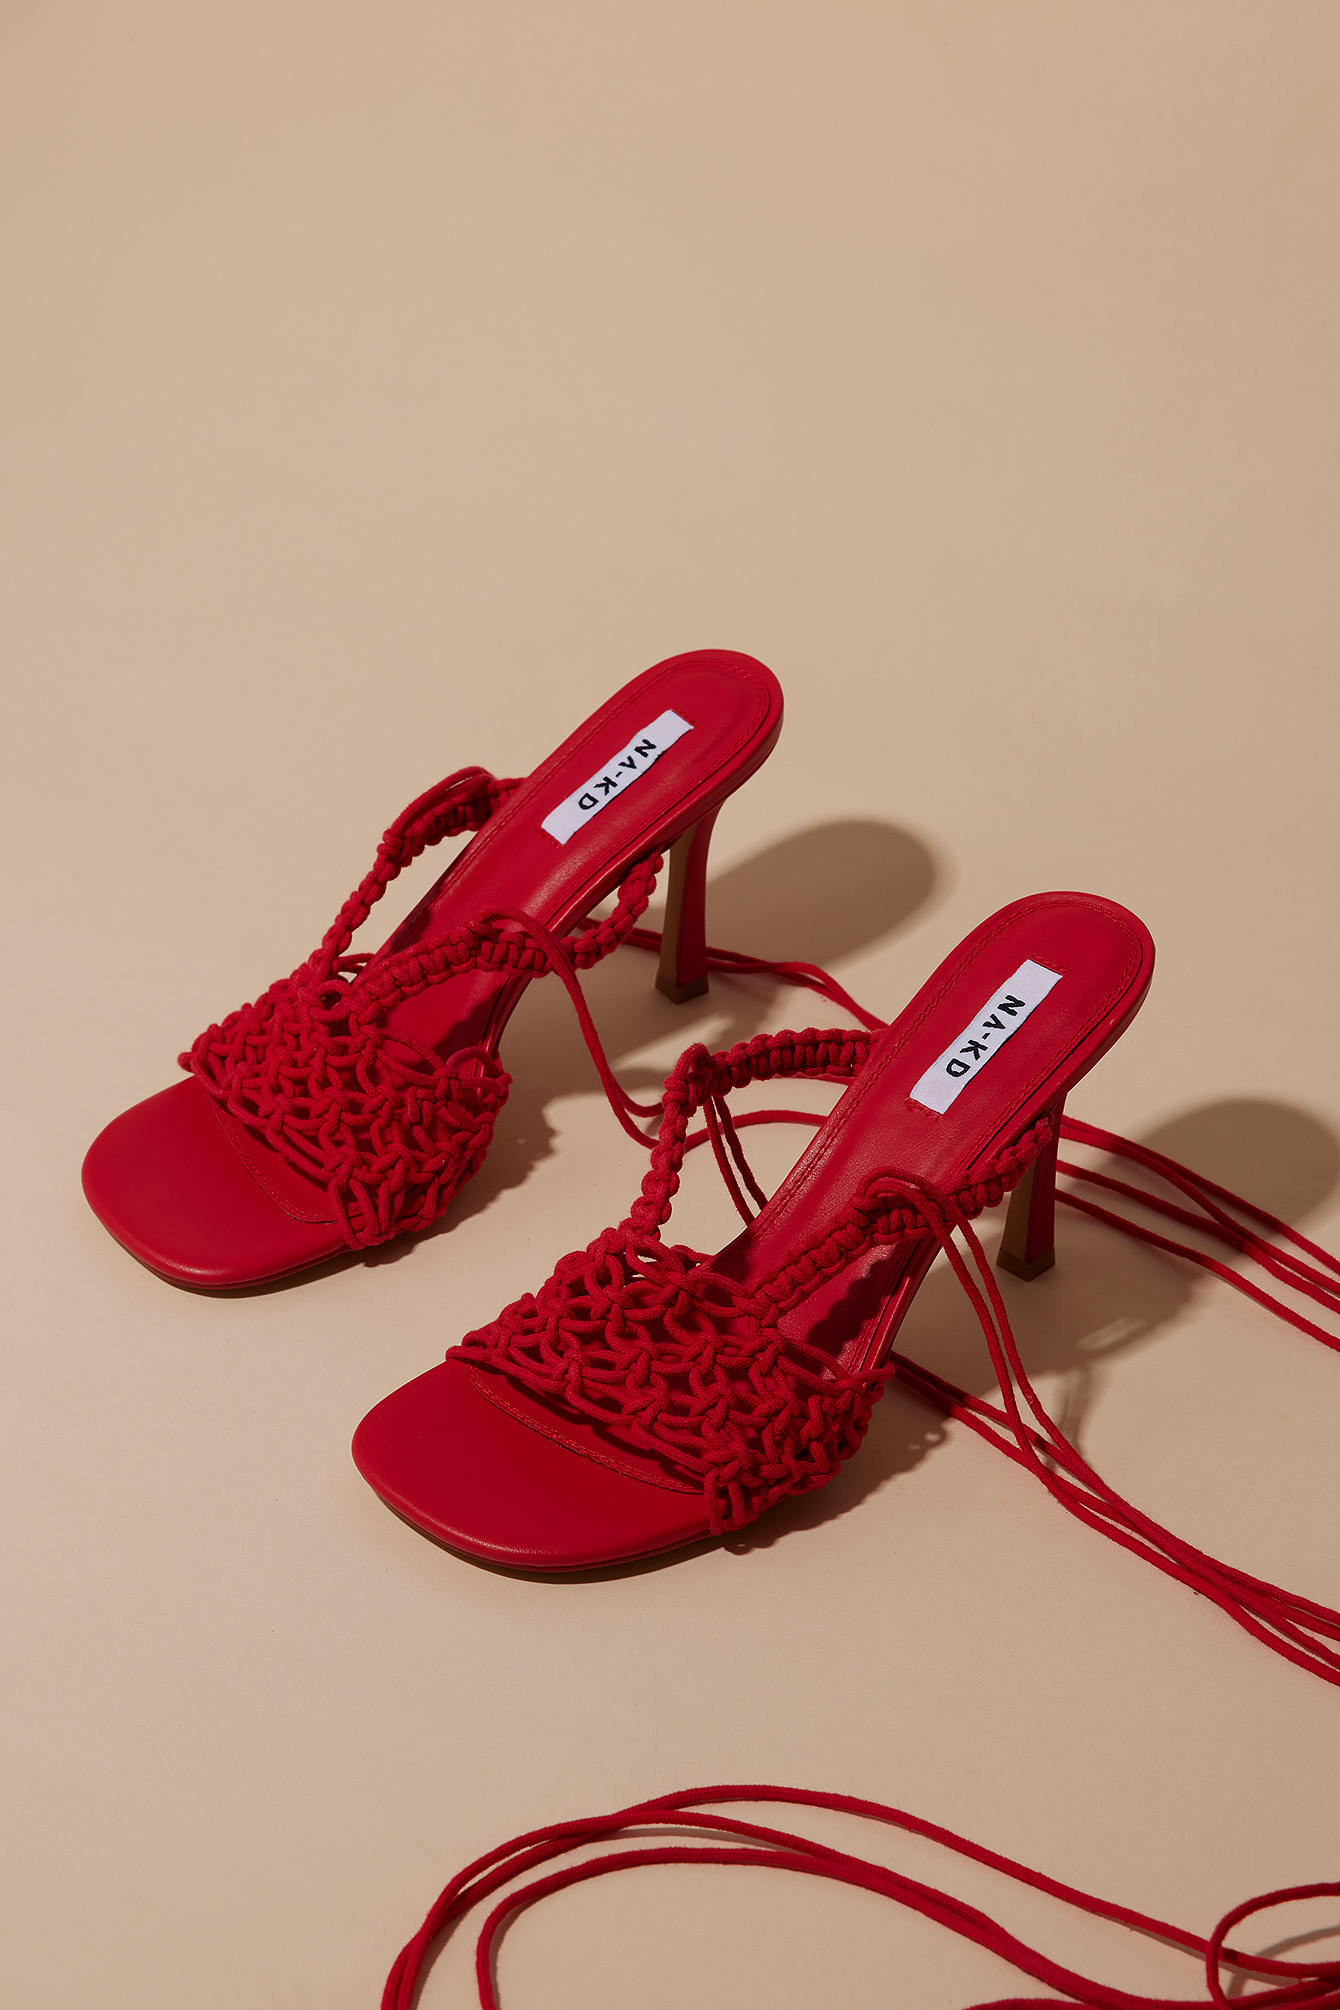 NA-KD Shoes Crocheted High Heels - Red